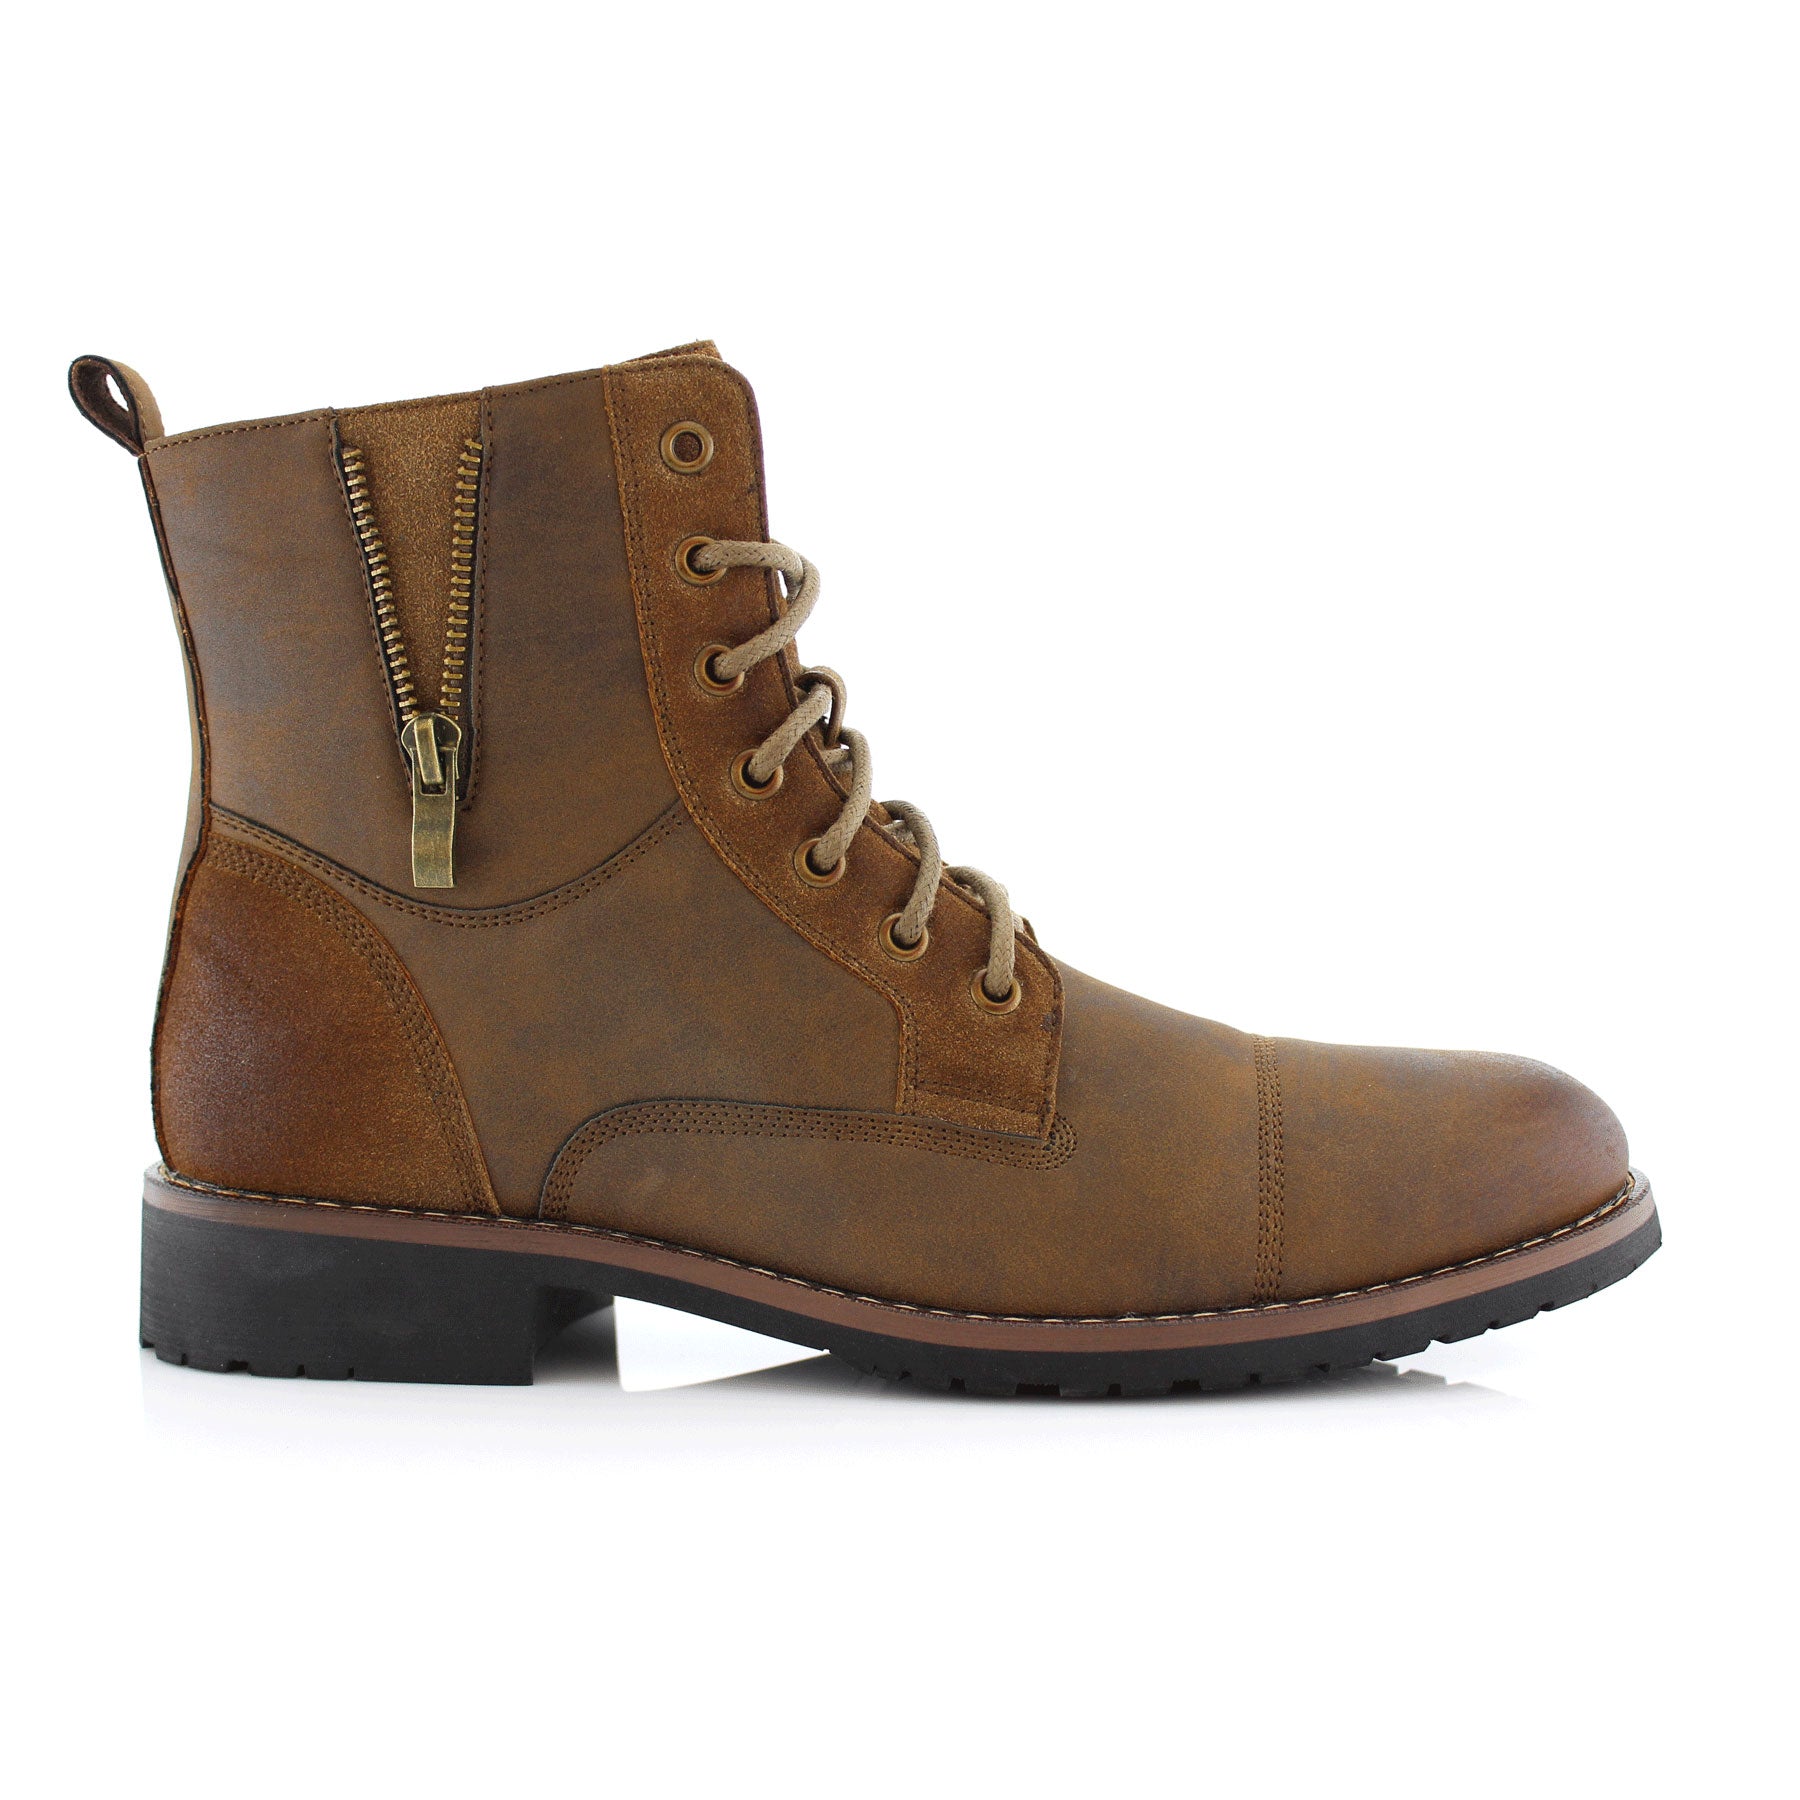 Duo-Textured Cap-Toe Boots | Reid by Ferro Aldo | Conal Footwear | Outer Side Angle View